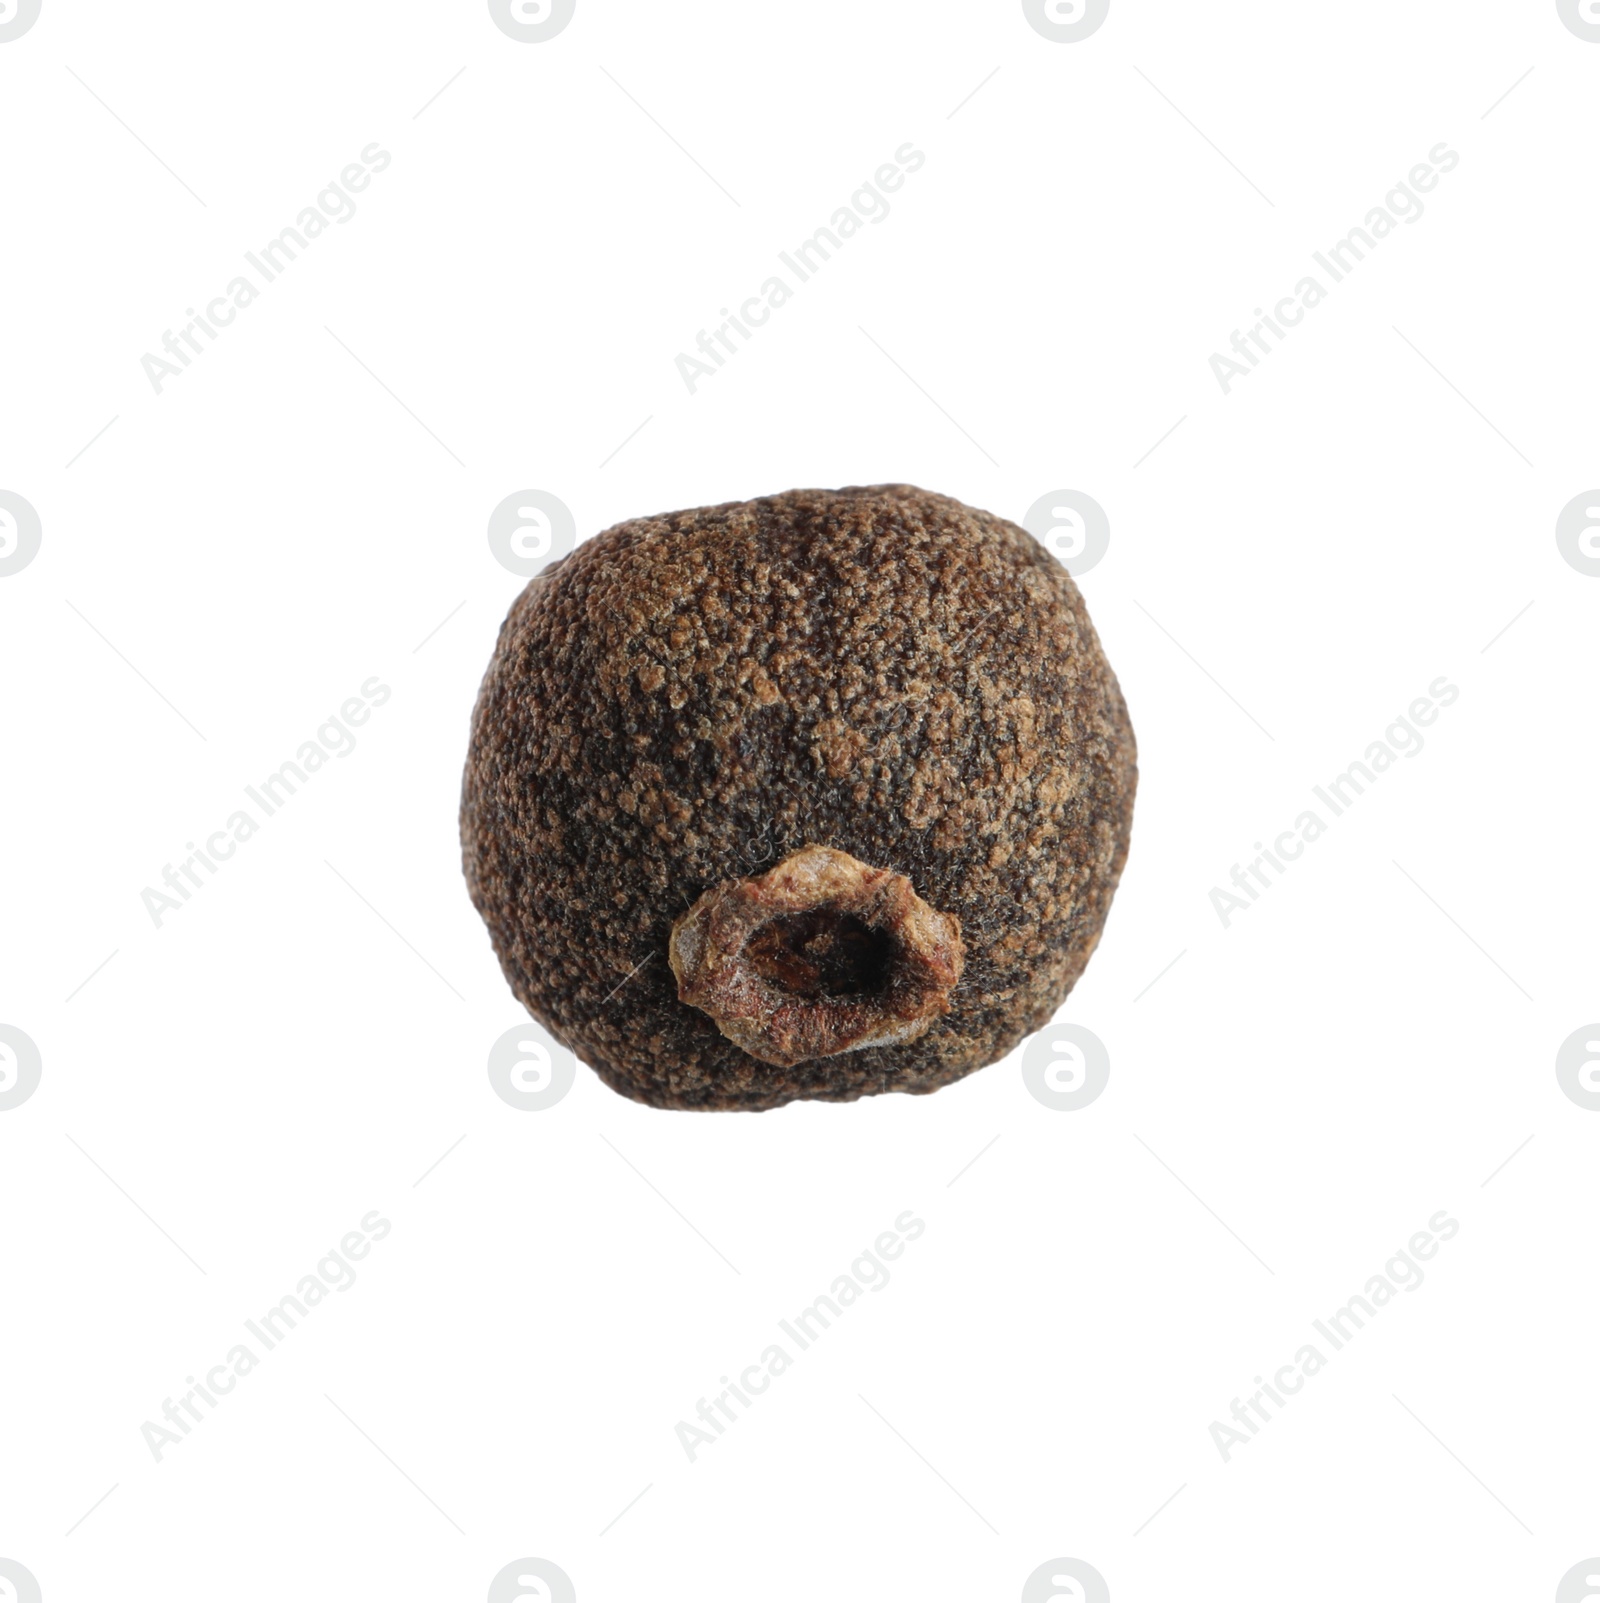 Photo of One aromatic allspice peppercorn isolated on white